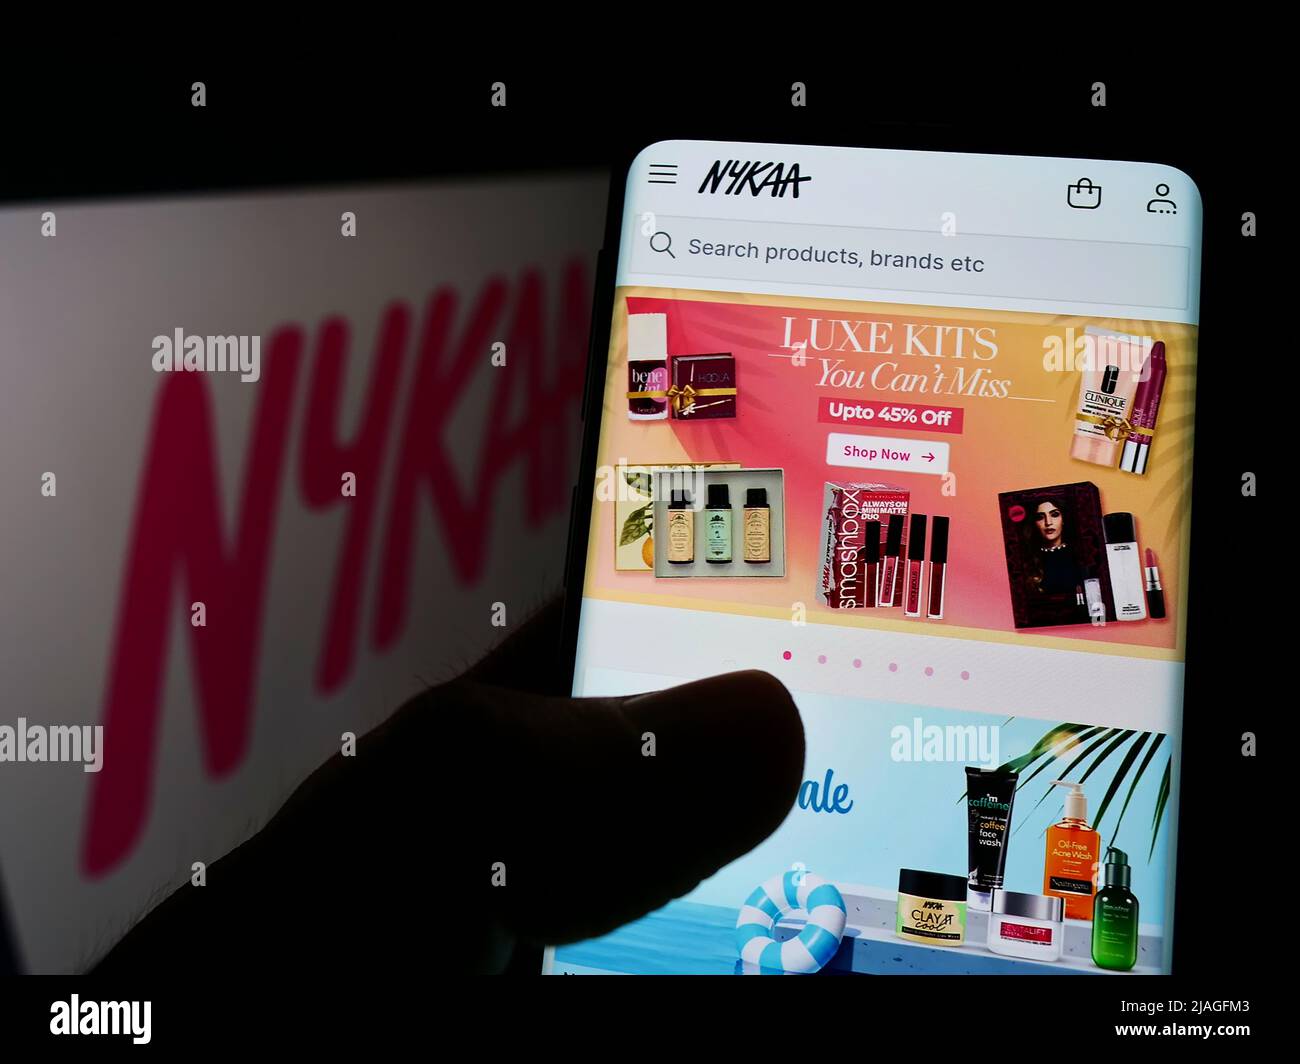 Person holding cellphone with webpage of e-commerce company Nykaa E-Retail Pvt. Ltd. on screen in front of logo. Focus on center of phone display. Stock Photo